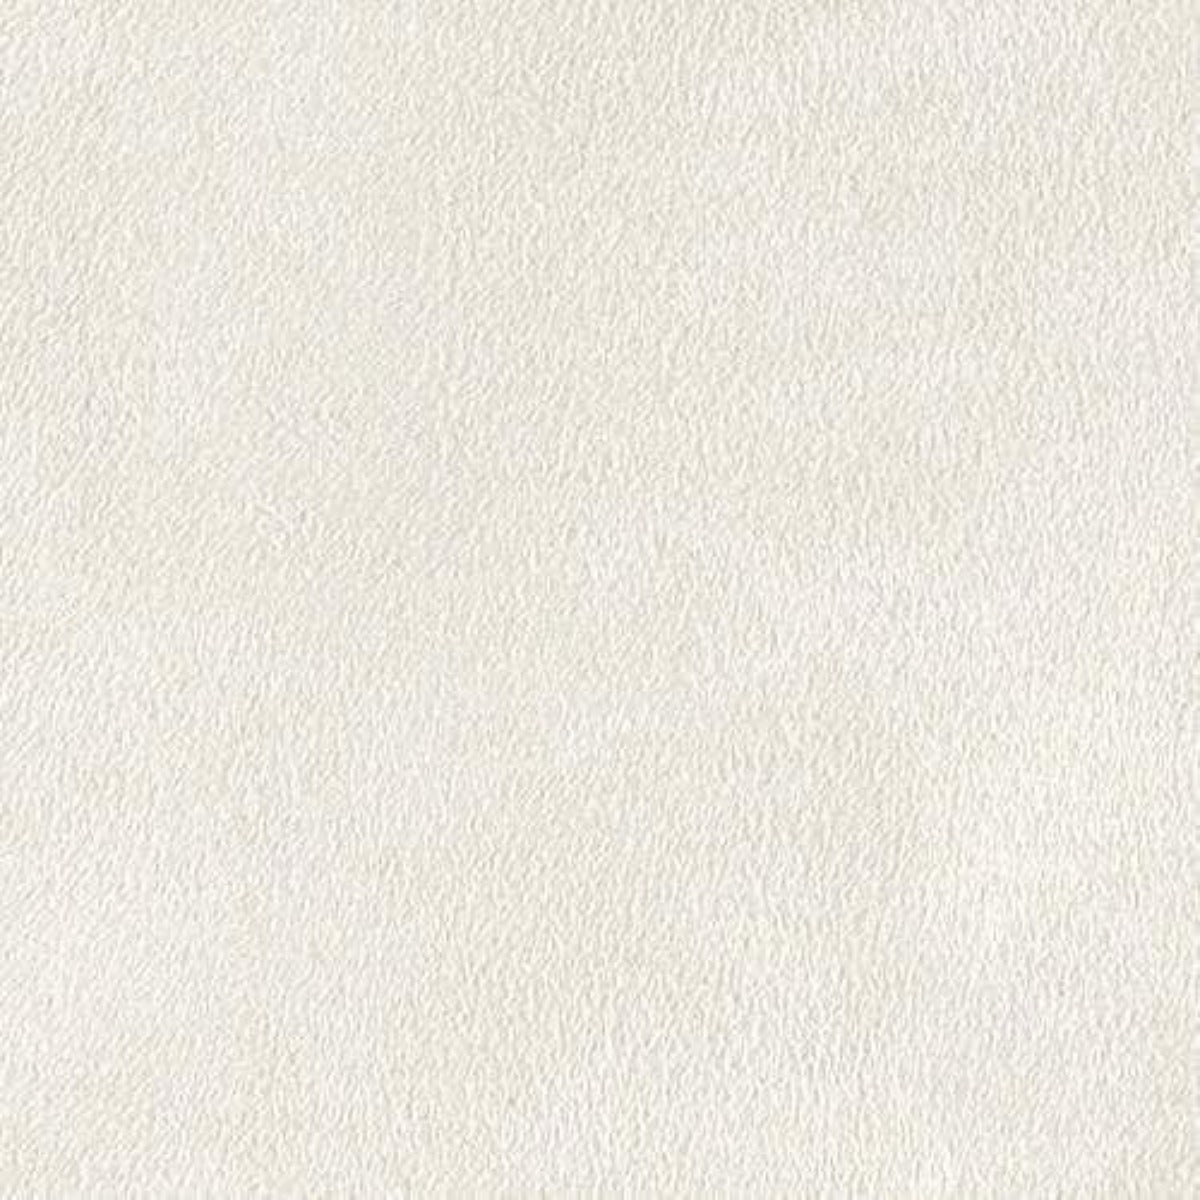 White Microsuede Fabric